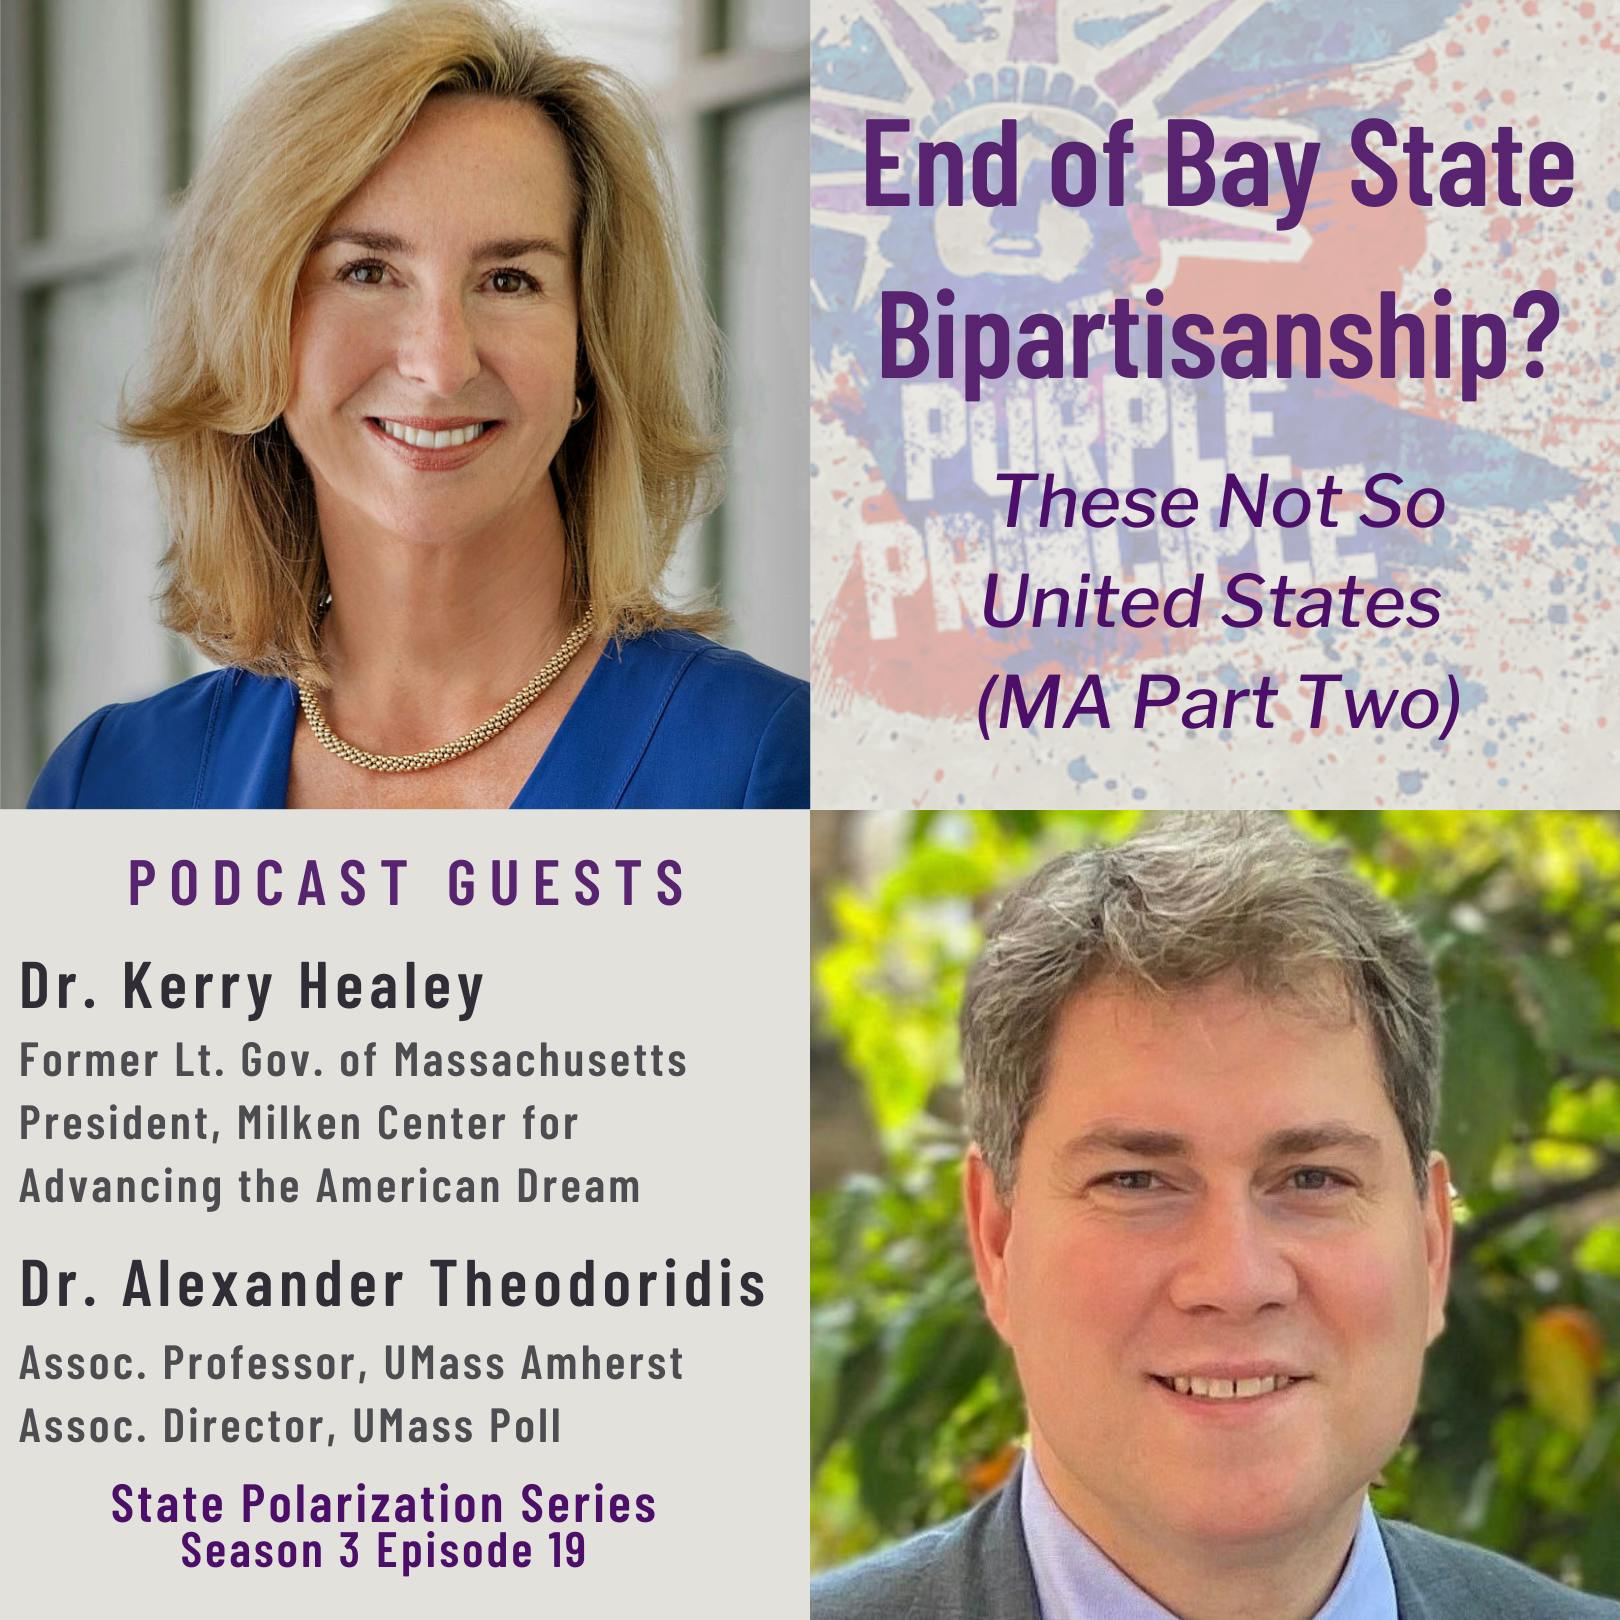 End of Bay State Bipartisanship?: These Not So United States (MA Part Two)